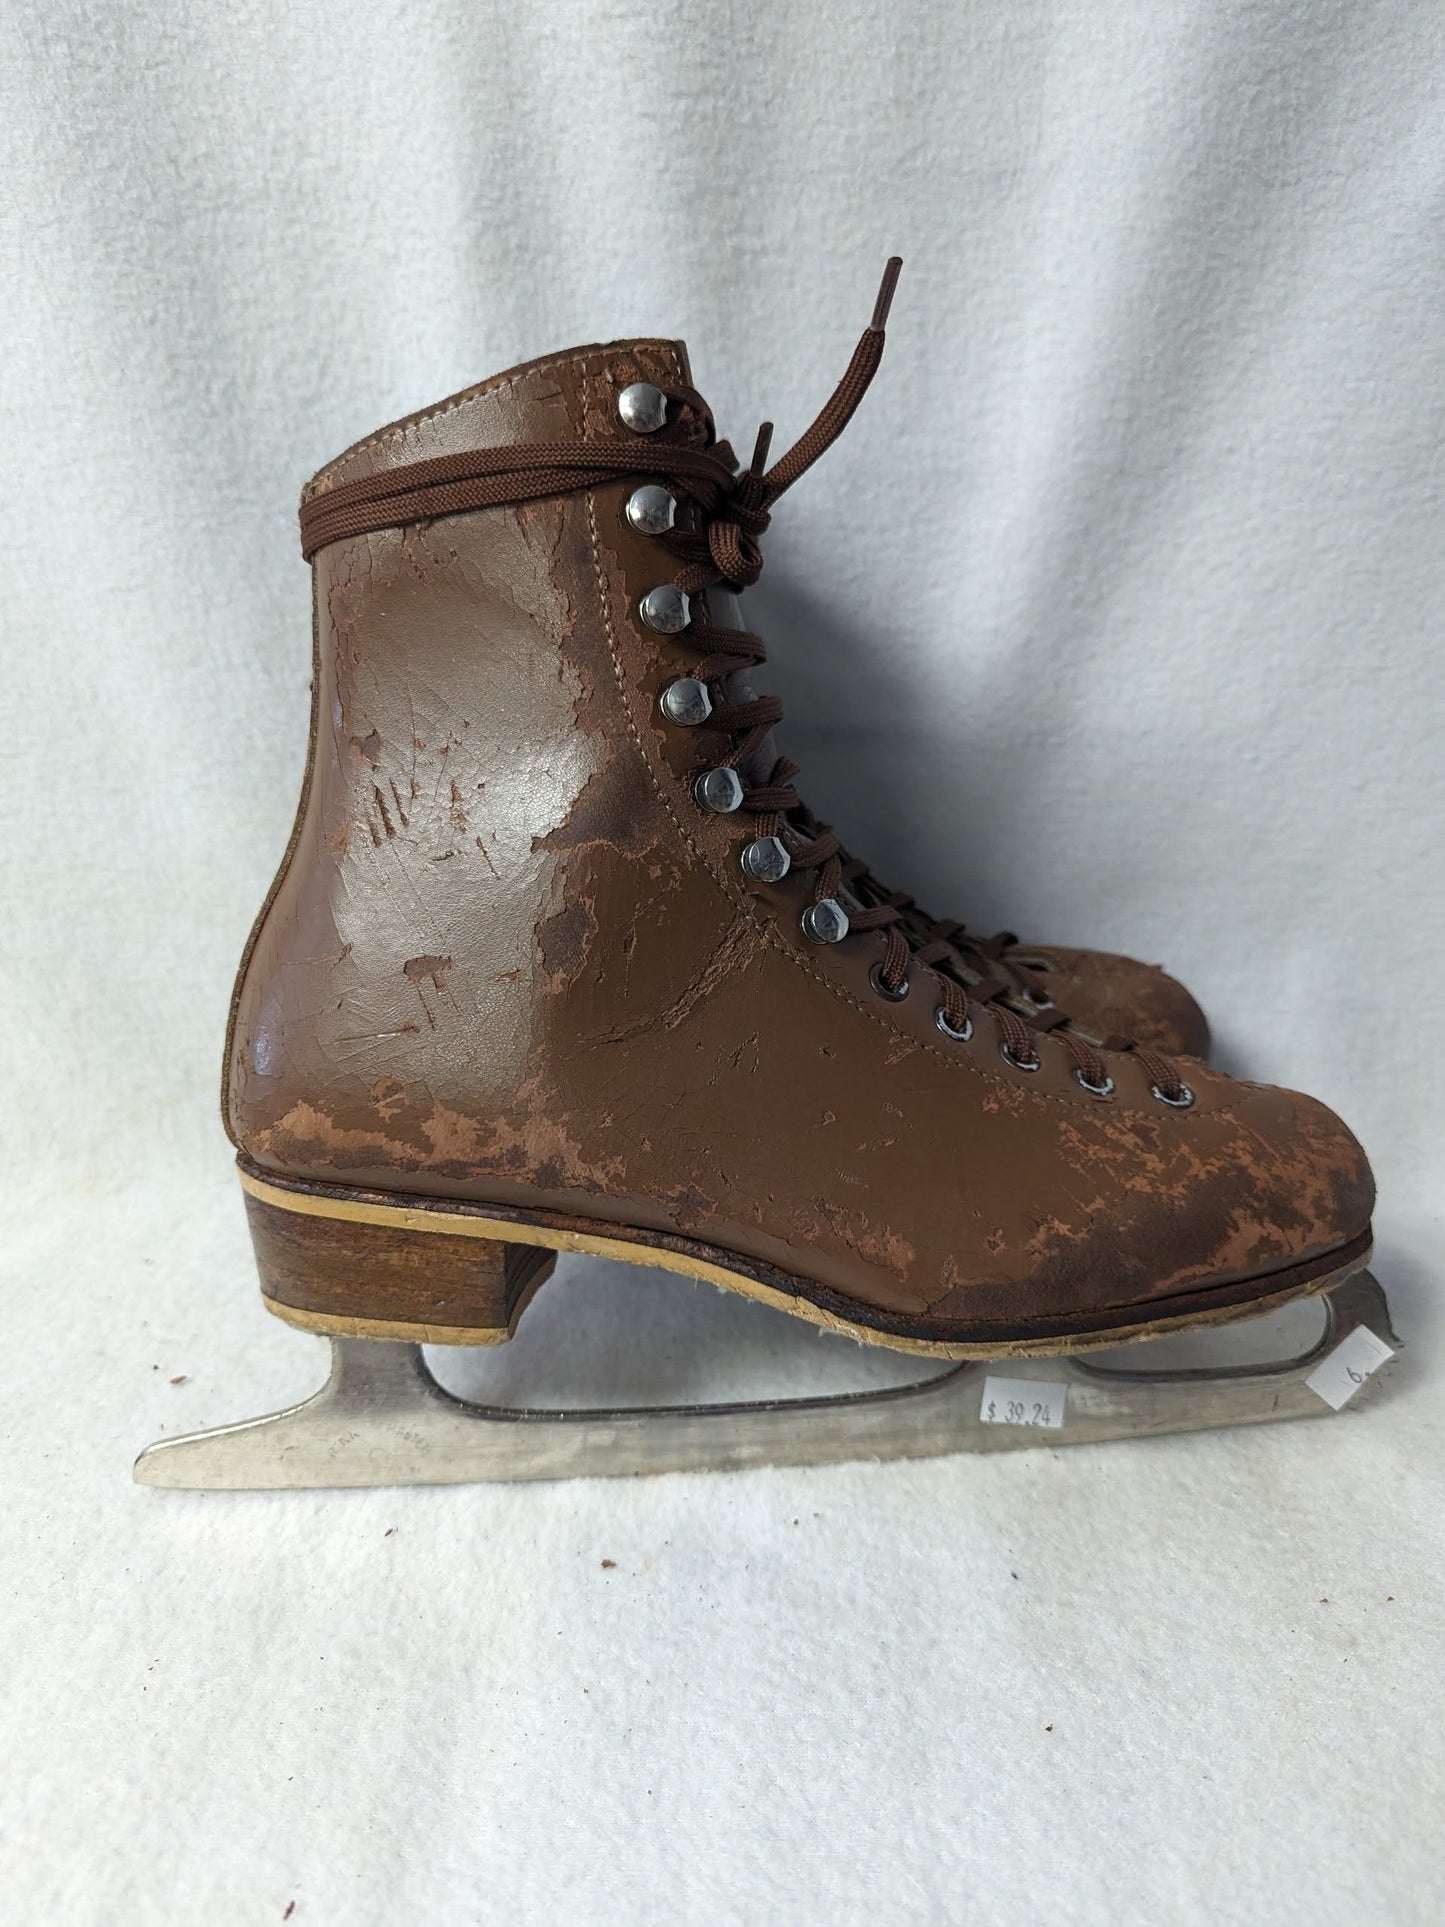 Rink Master Ice Skates Size 6 Color Brown Condition Used